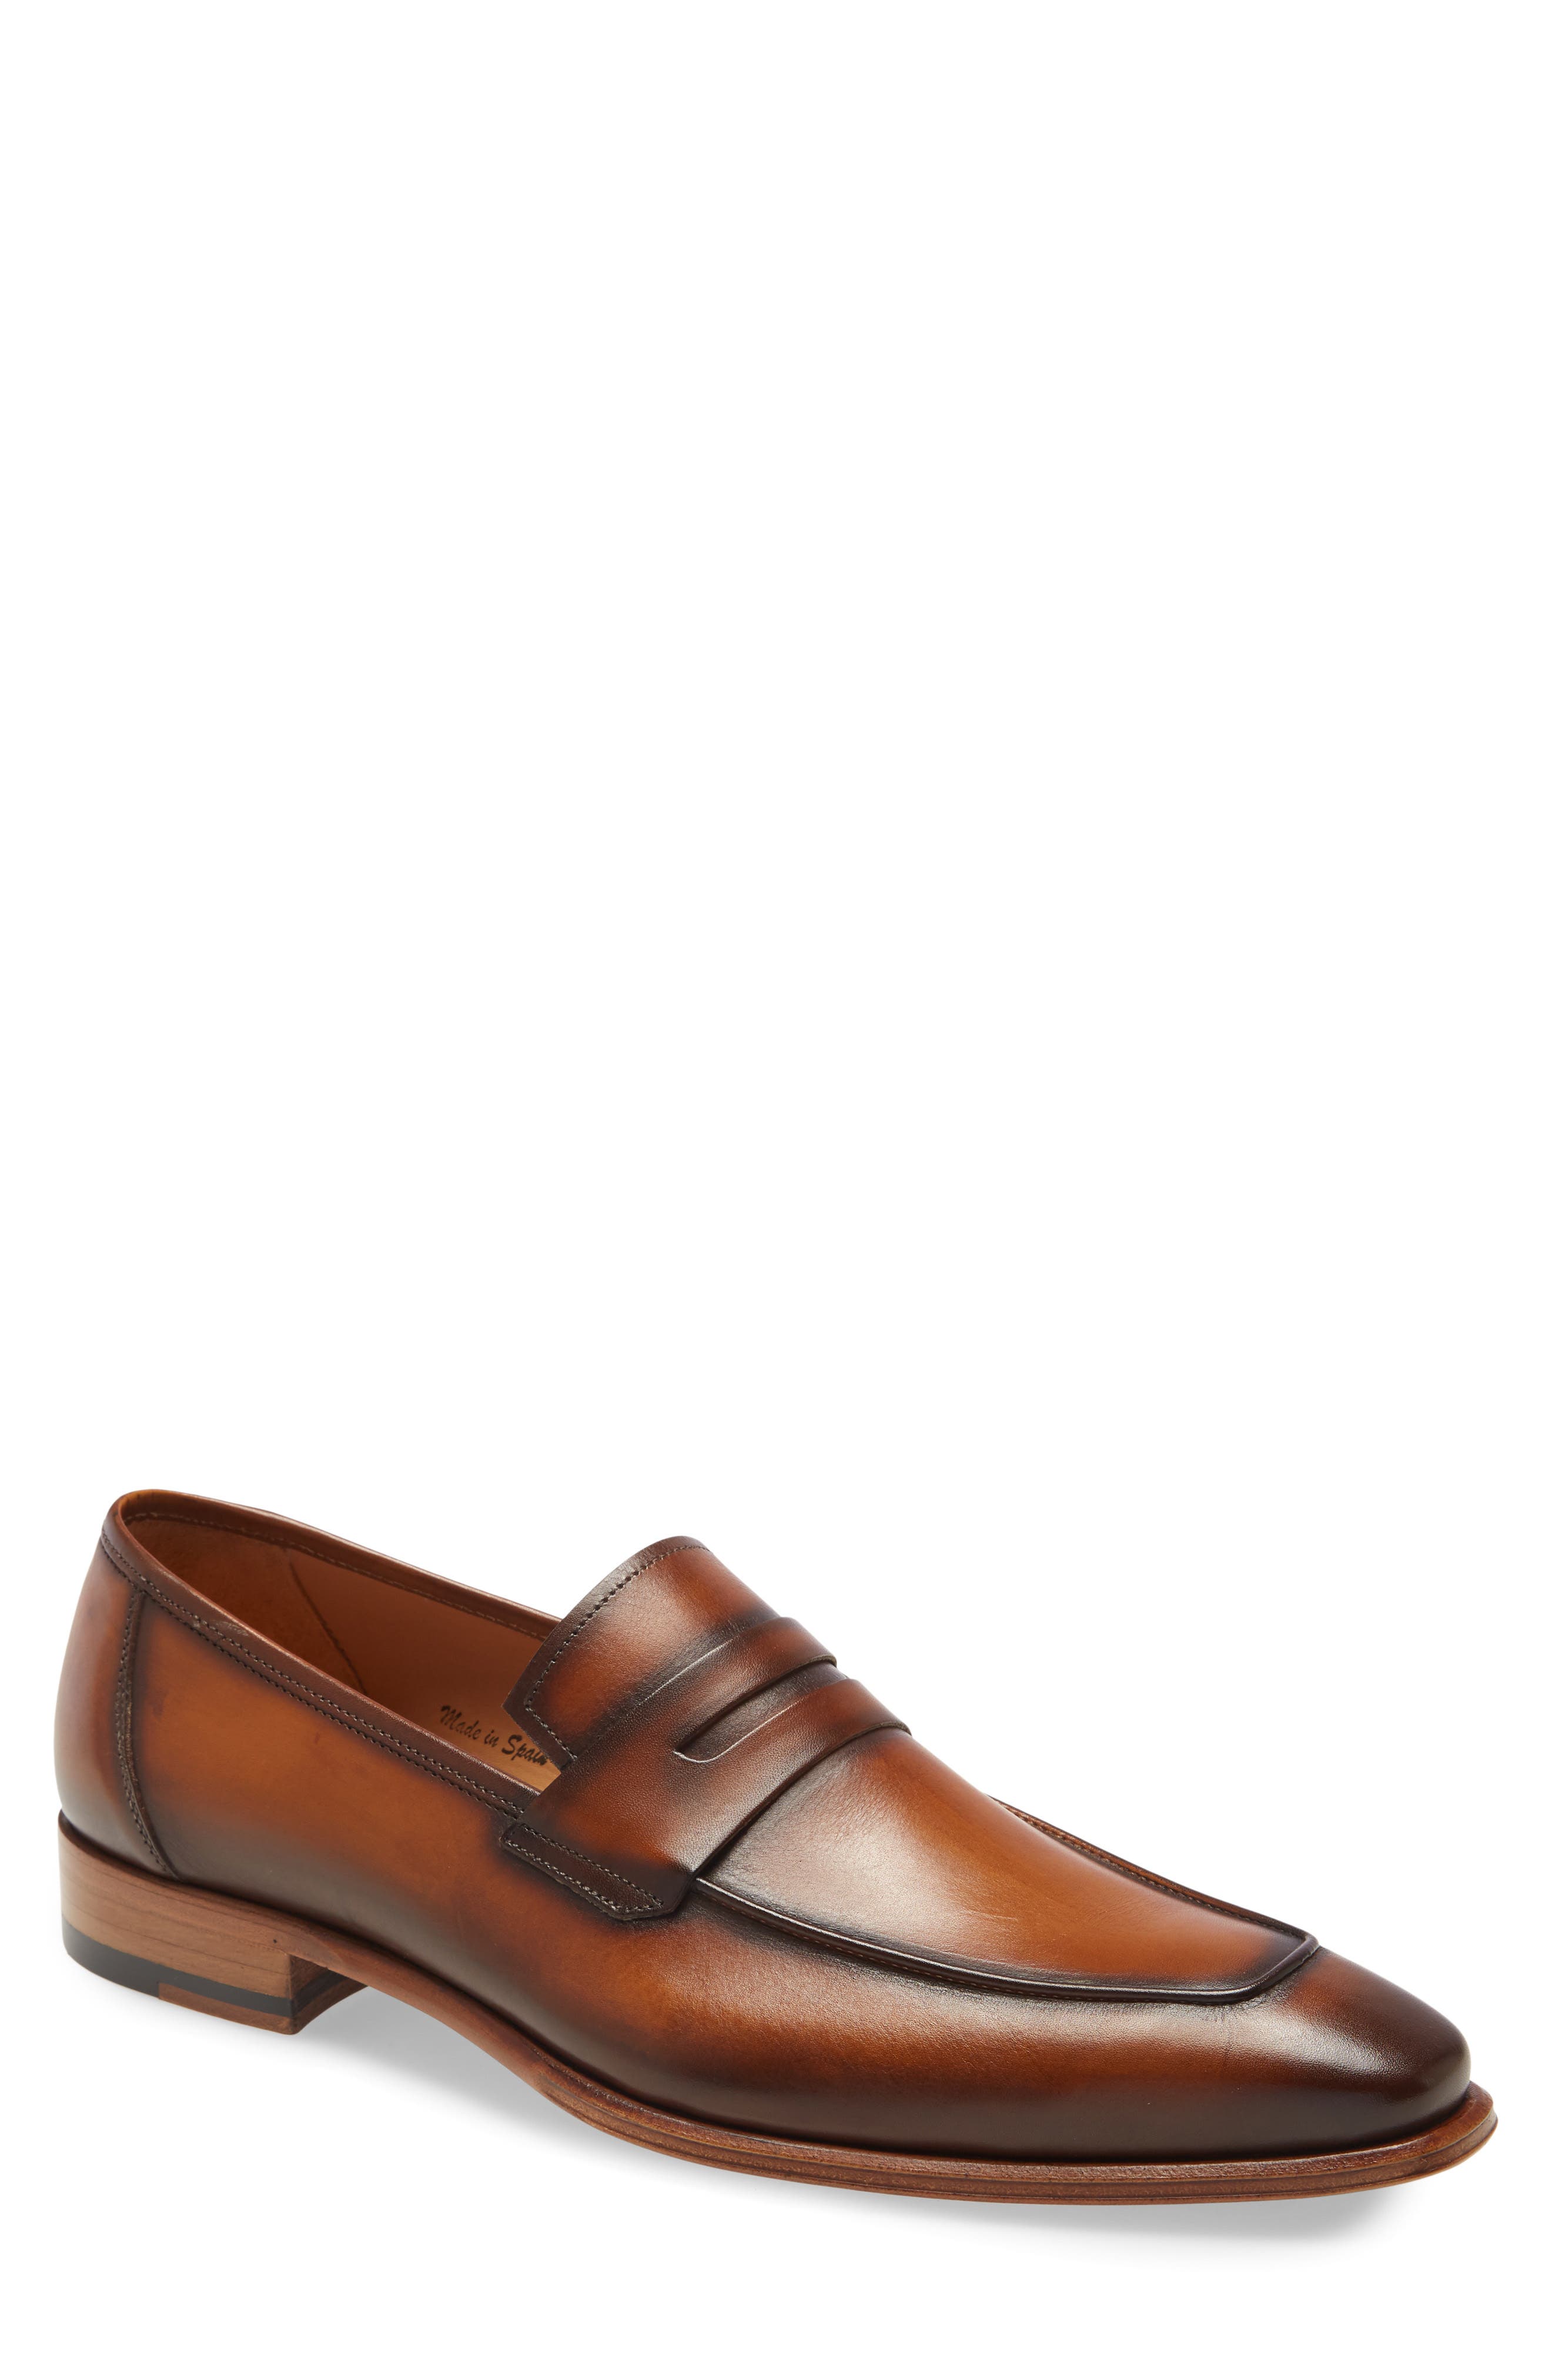 mezlan shoes loafers